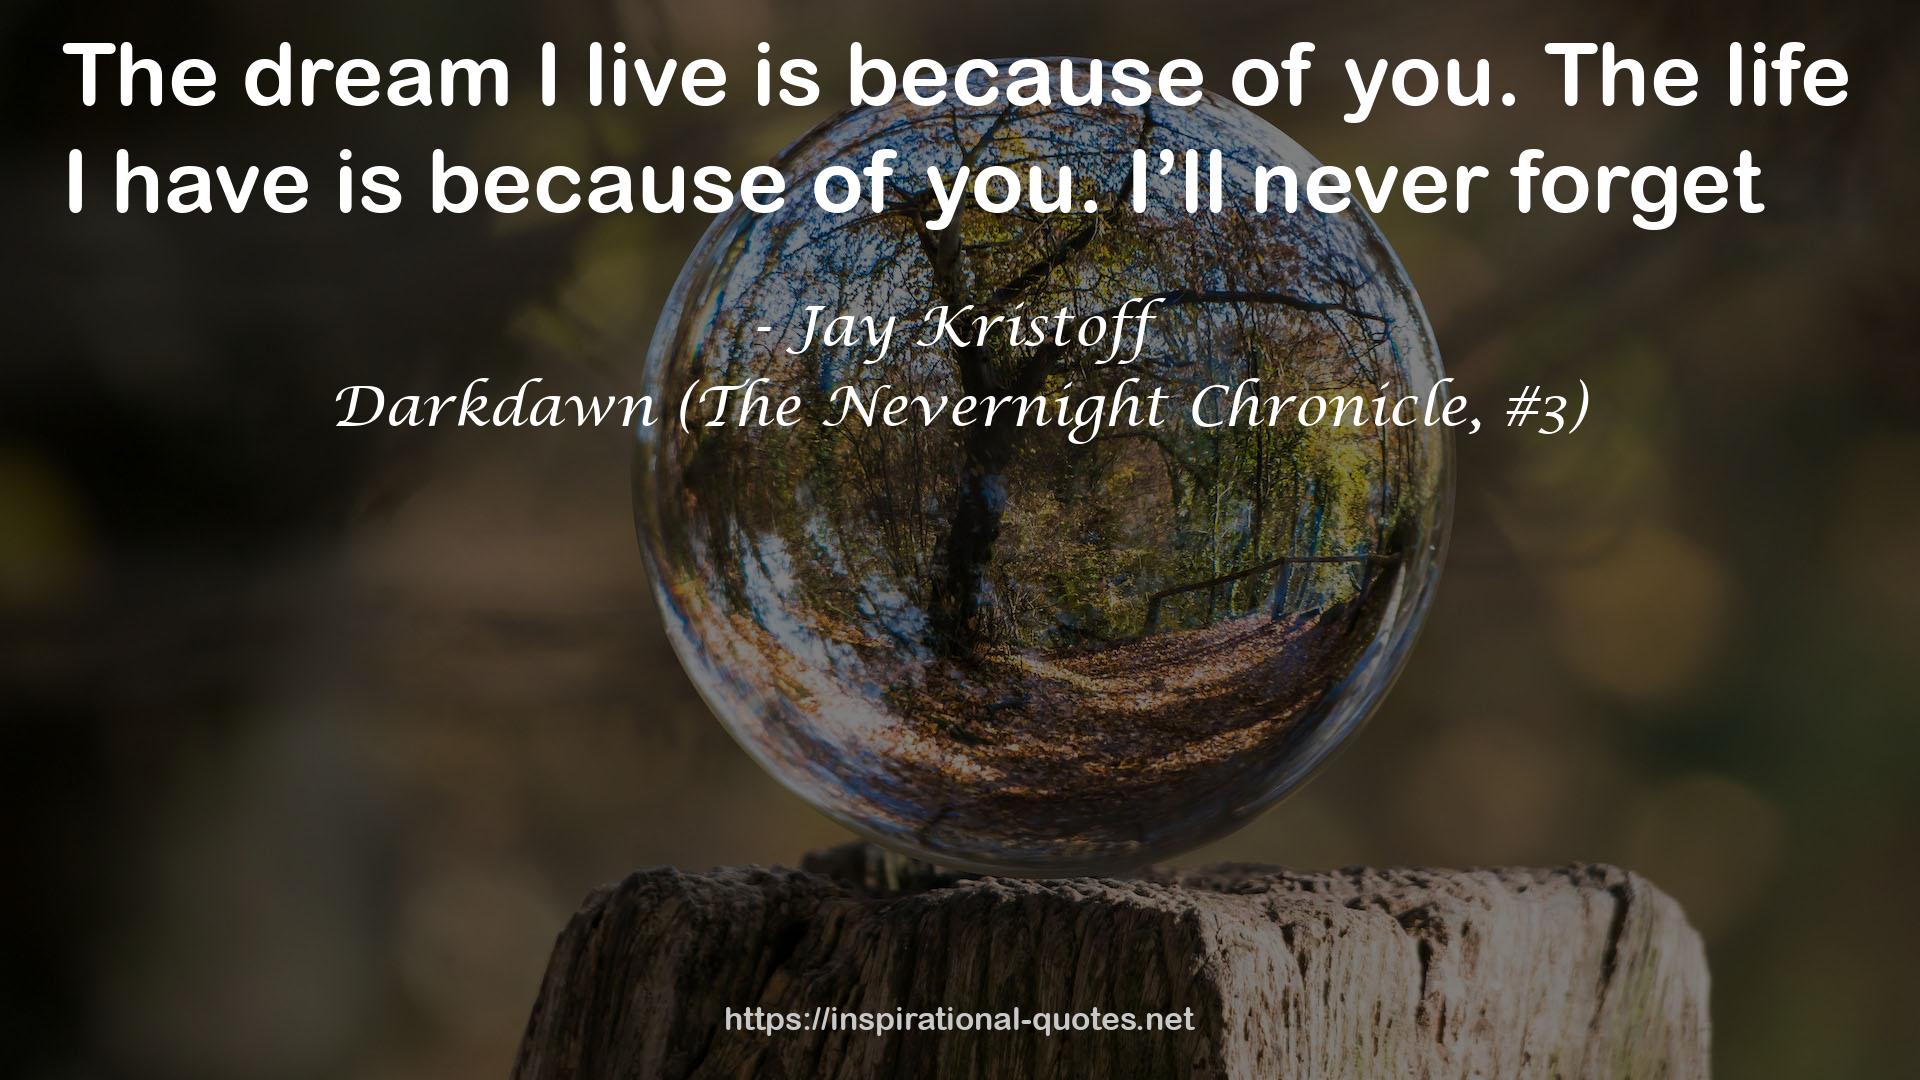 Darkdawn (The Nevernight Chronicle, #3) QUOTES